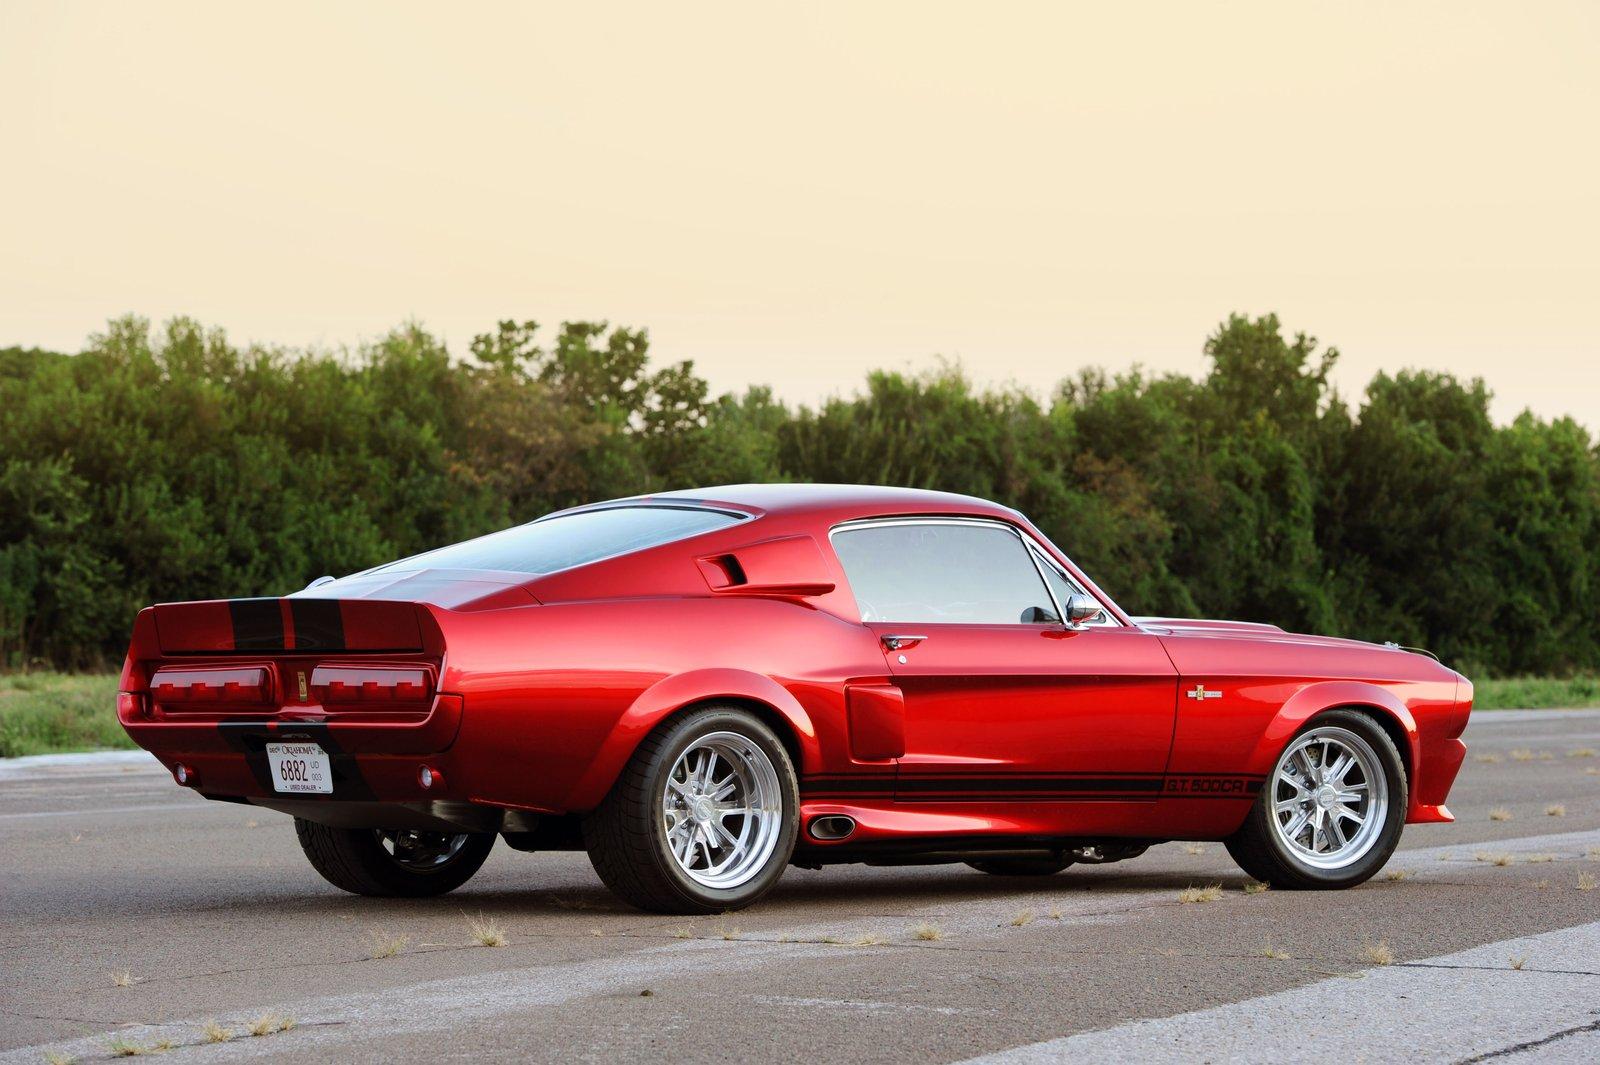 1967 Shelby GT500CR - a brutal car from Classic Recreations